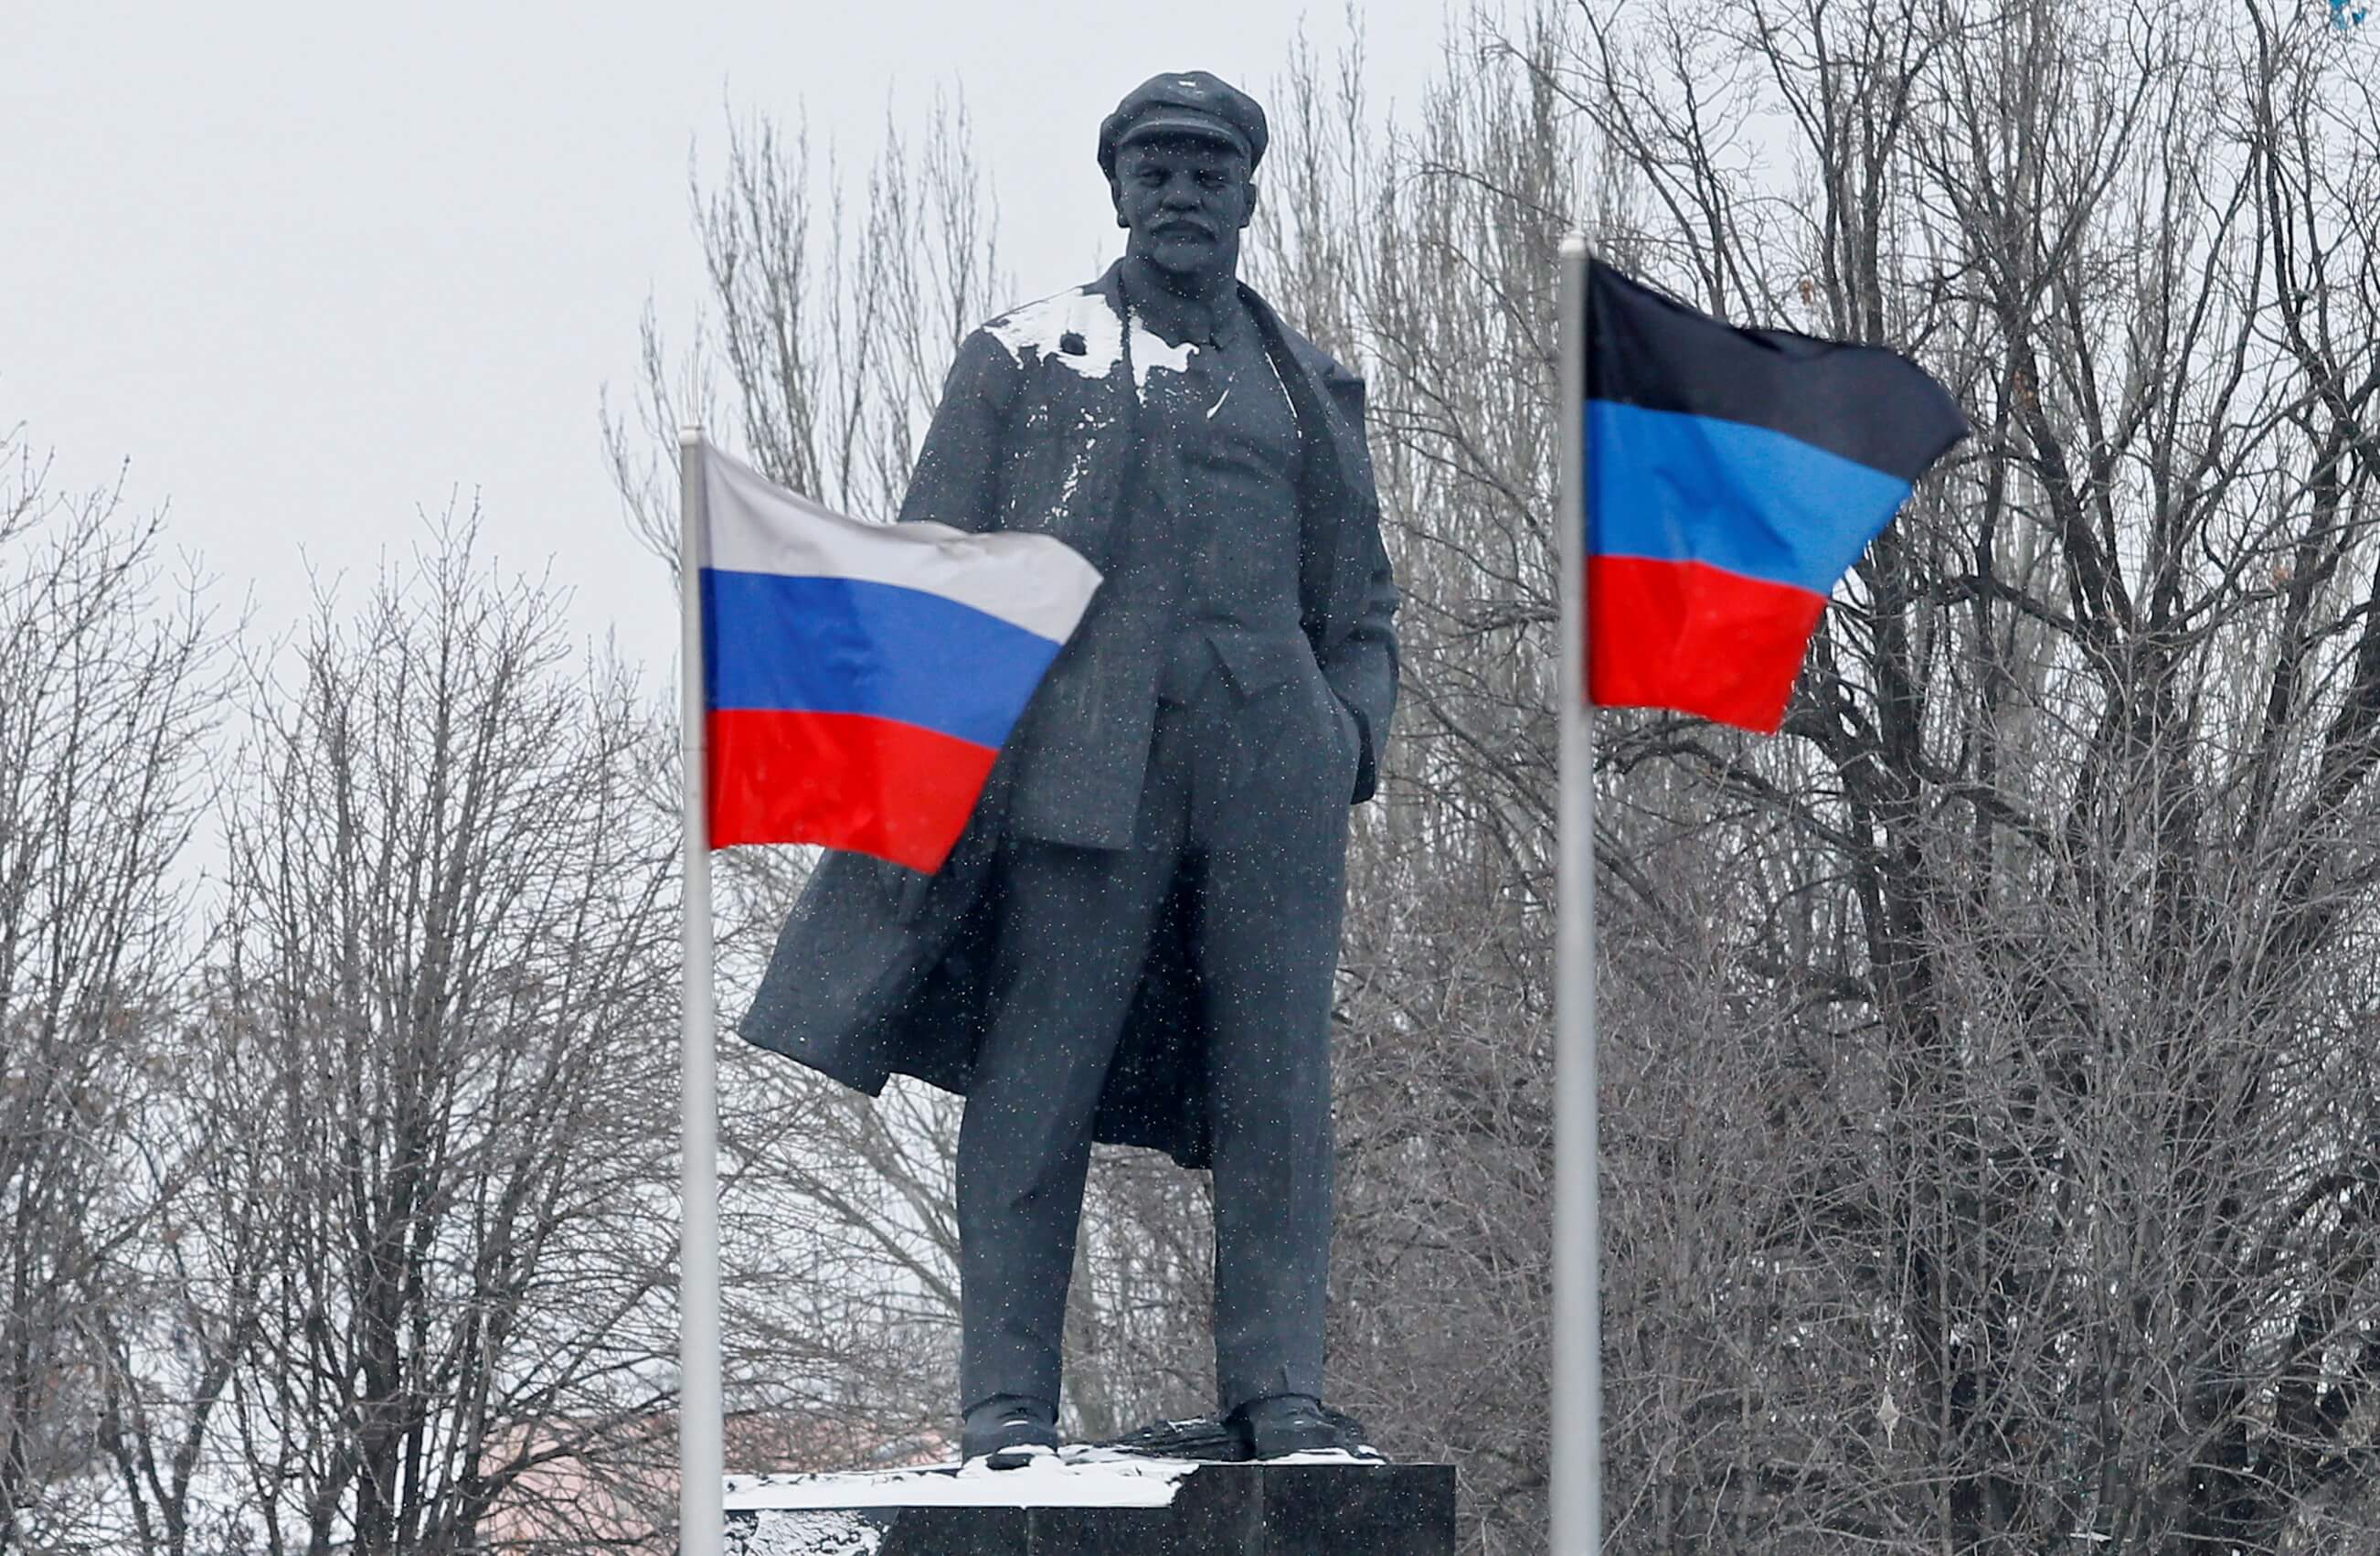 Tack - Flags of Russia and the self-proclaimed Donetsk People's Republic wave in the wind near a monument to Soviet state founder Vladimir Lenin during snowfall in the rebel-held city of Donetsk, Ukraine January 24, 2022.